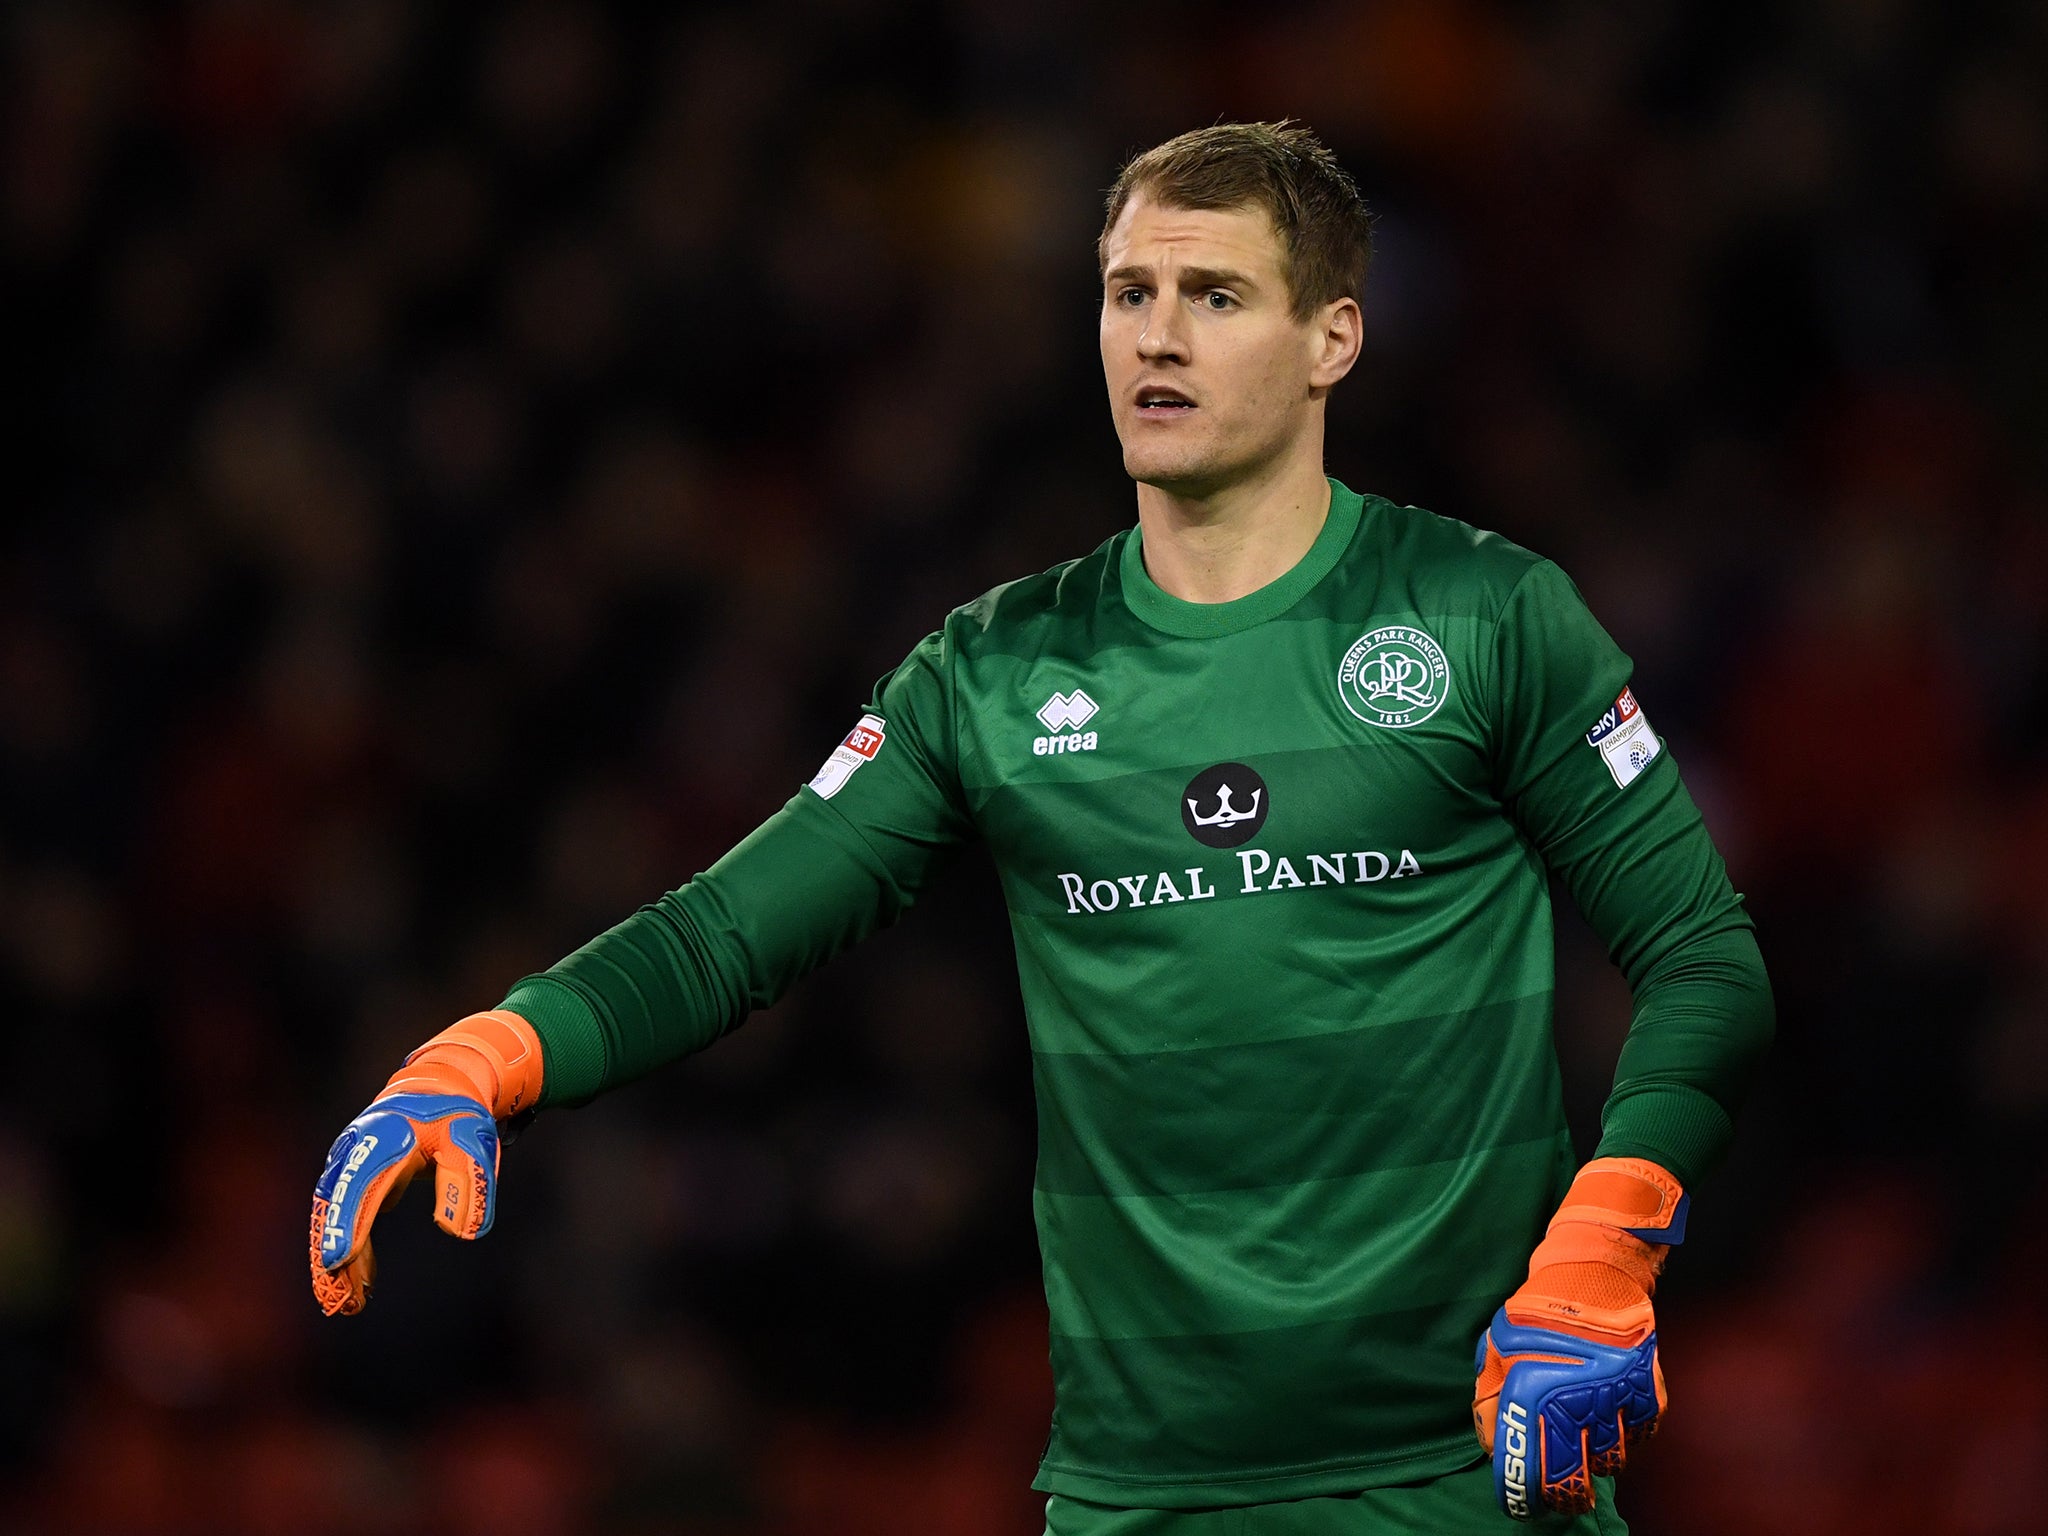 Cardiff are also looking to sign Alex Smithies from QPR